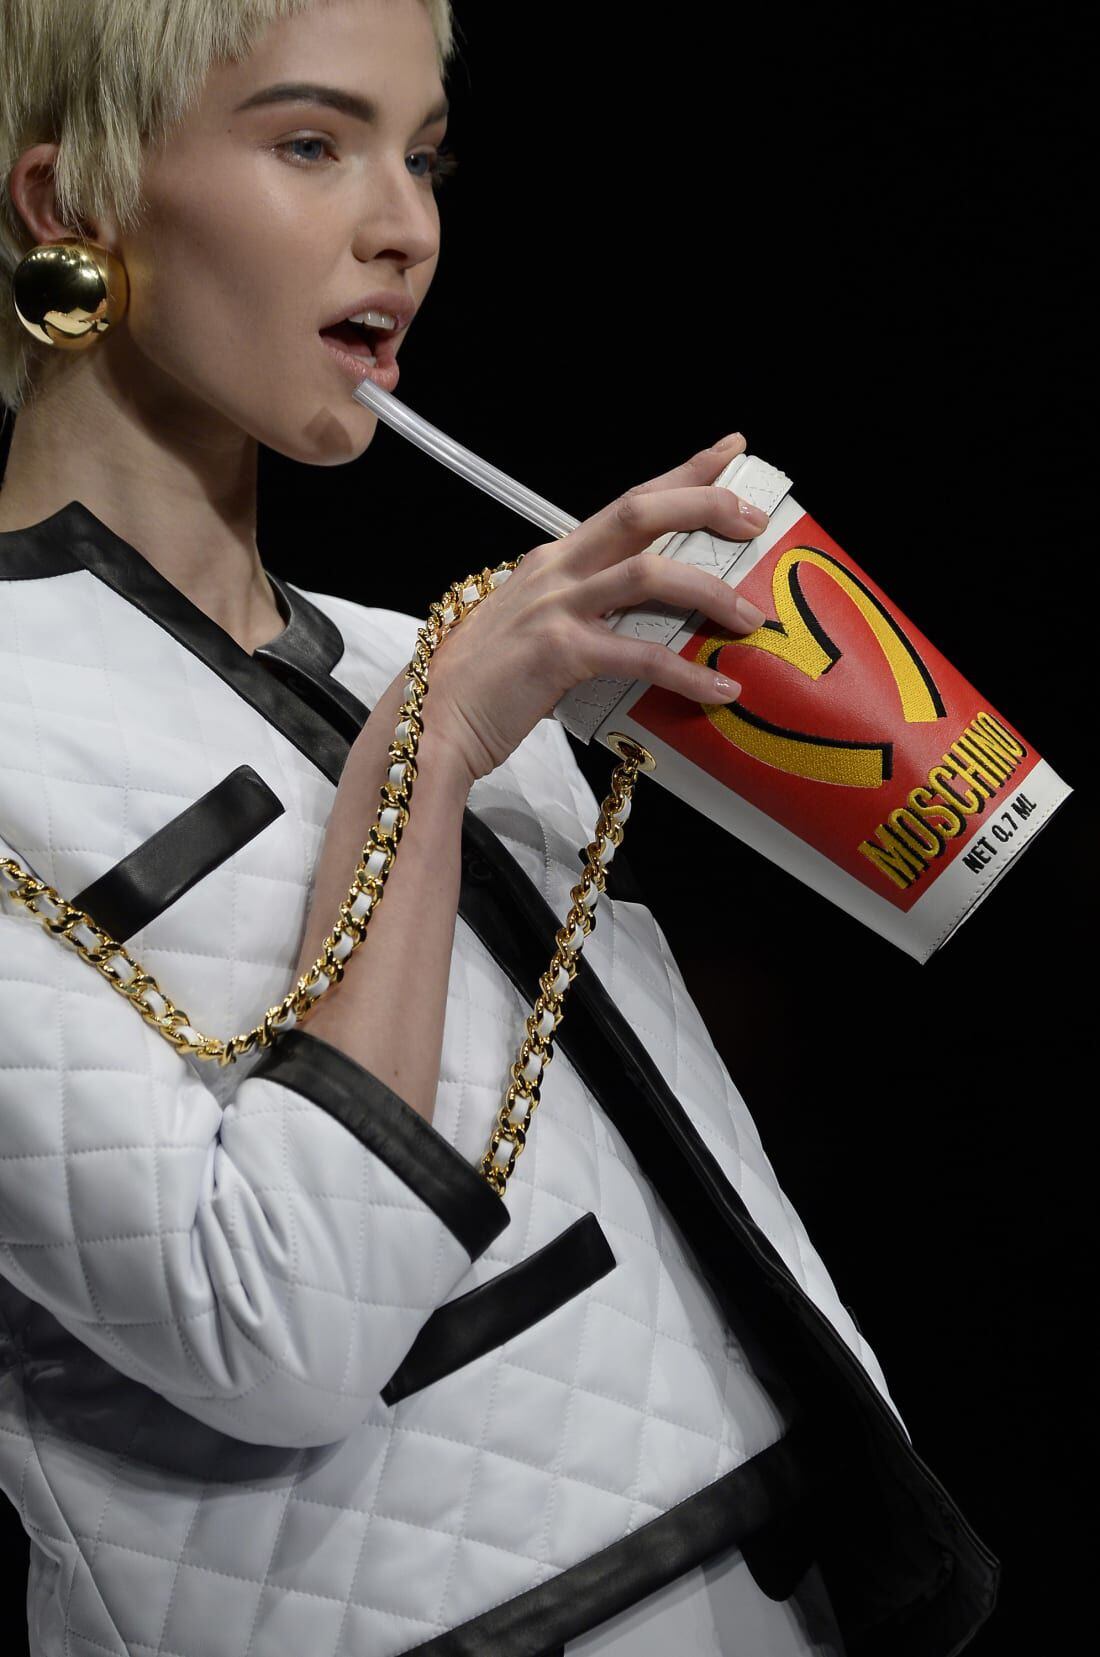 Balenciaga trash bags: Luxury brand retails garbage pouch for $1,790